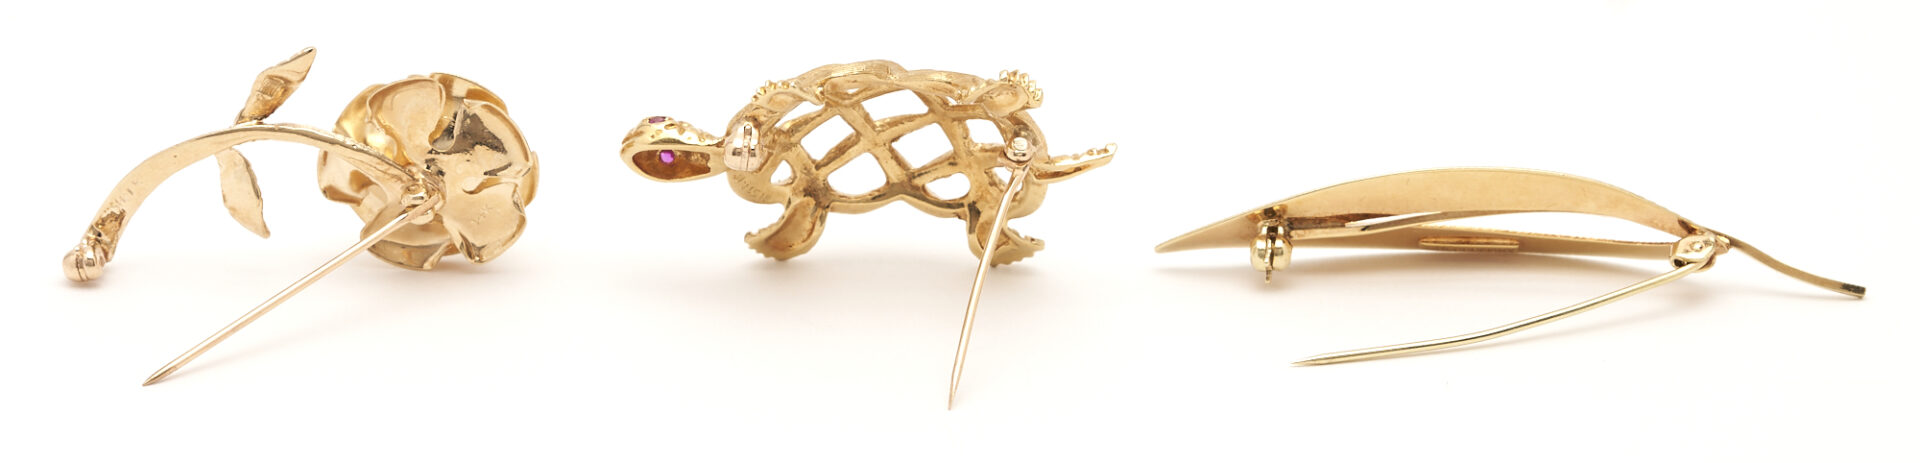 Lot 421: 3 Ladies' Gold Brooches: Flower, Turtle and Leaf forms